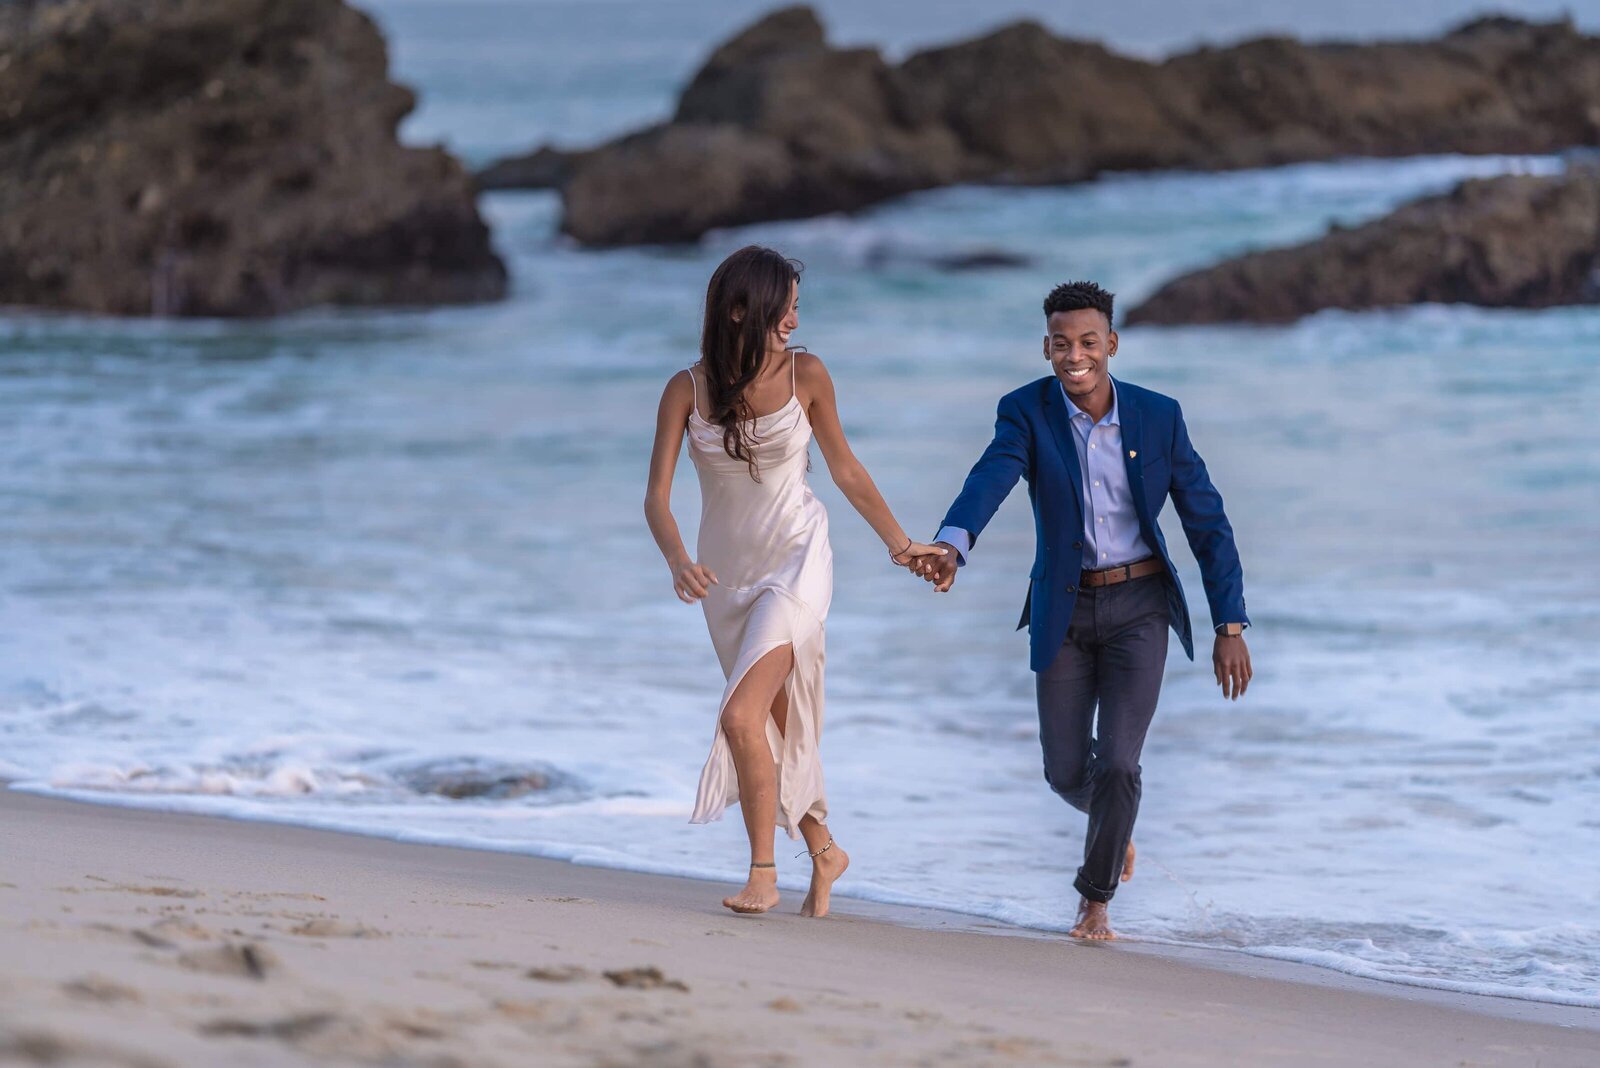 Young couple running from waves on beach while wearing formal clothes.